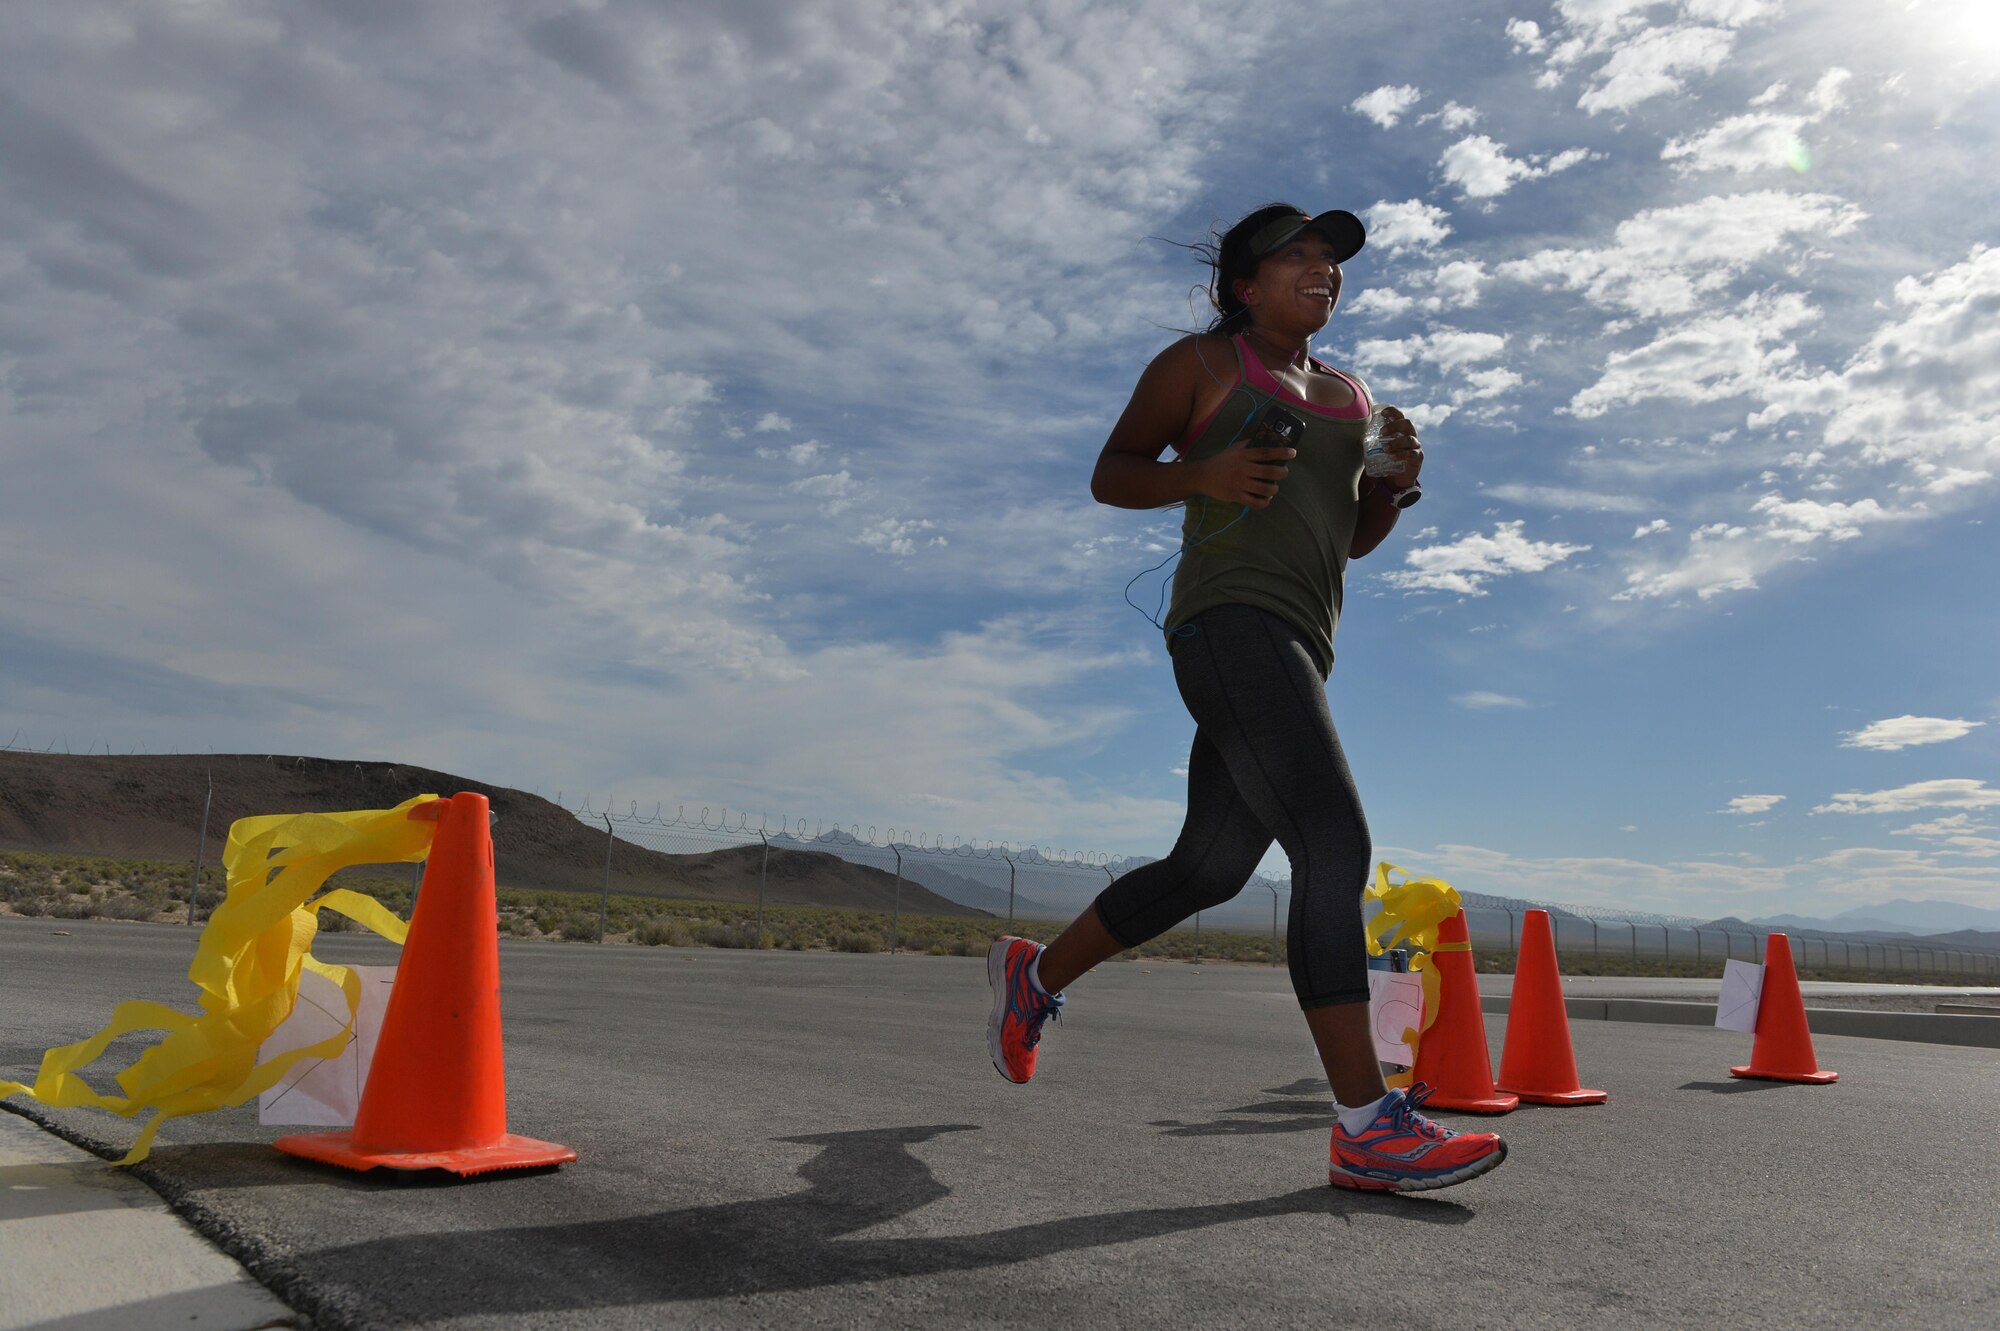 An Airman assigned to the 432nd Wing/ 432nd Air Expeditionary Wing at Creech Air Force Base, Nevada, runs during a 5k and 10 k race June 10, 2016.To help promote physical readiness, obstacle courses, races and unit workout sessions are organized on a regular basis at Creech. (U.S. Air Force photo by Airman 1st Class Kristan Campbell/Released).